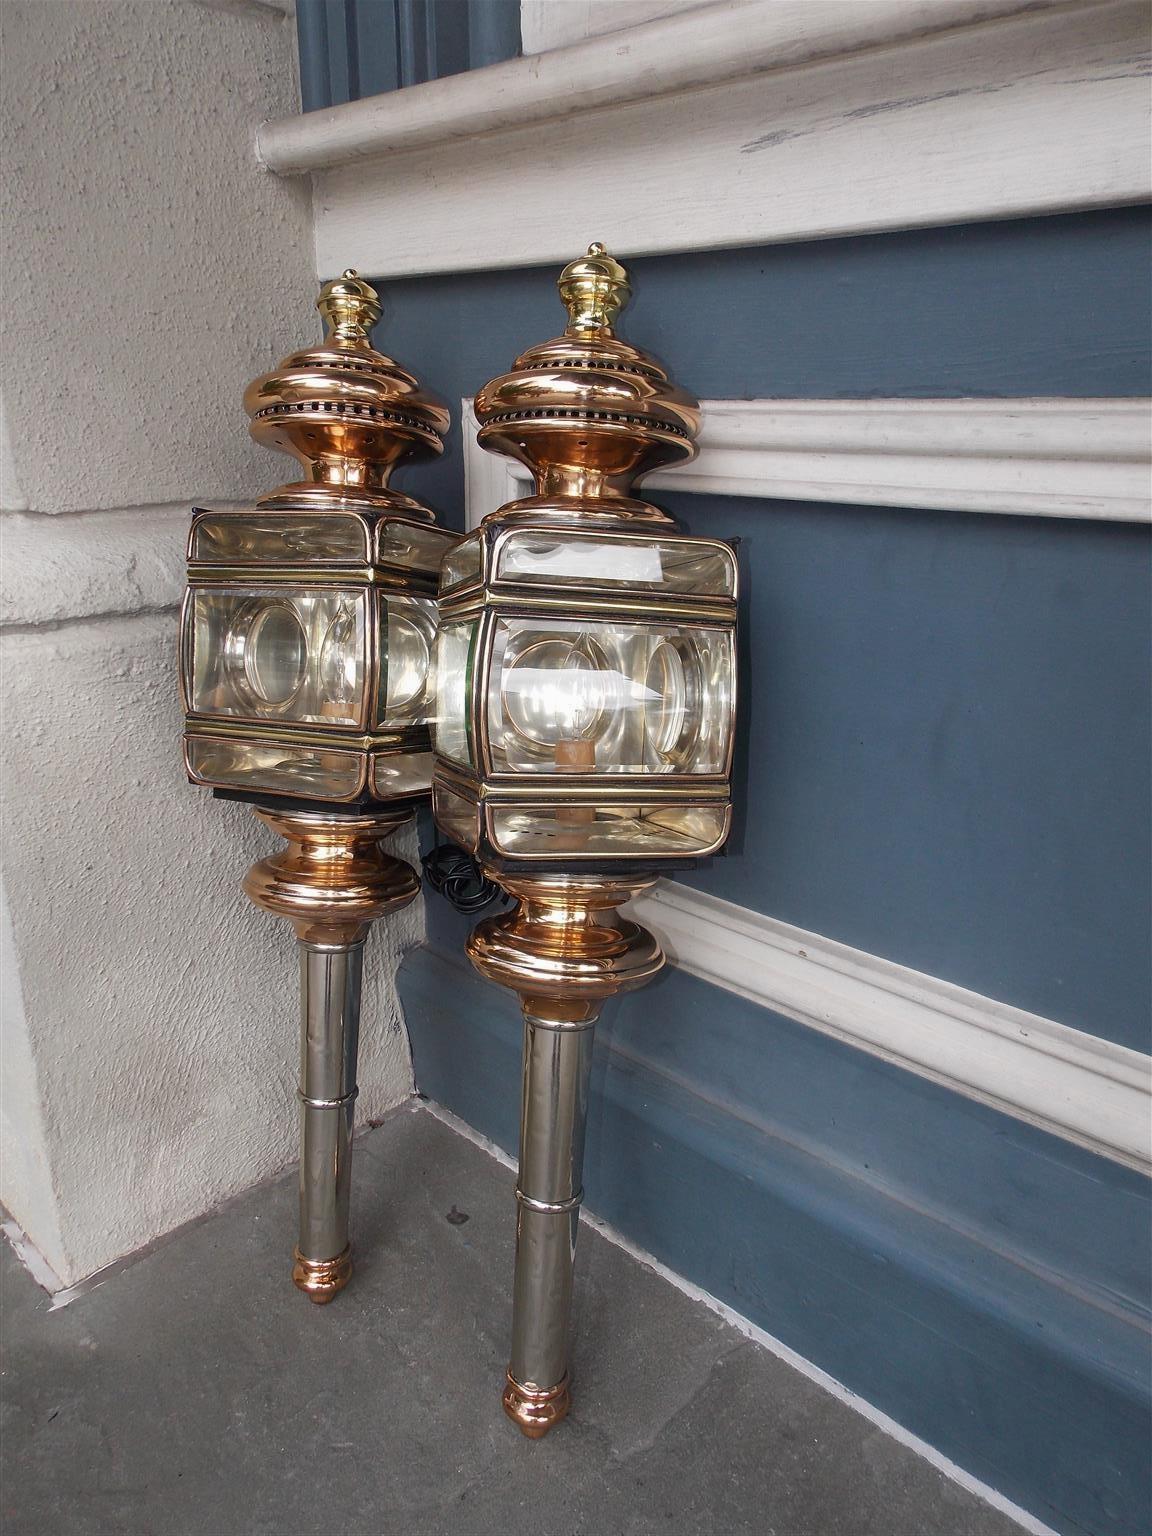 Pair of American nickel silver, brass, and copper coach lanterns with circular bulbous vented finials, original bowed beveled glass, and terminating on turned ringed bulbous reservoirs. Mid-19th century. Signed English and Mersick, New Haven, CT.